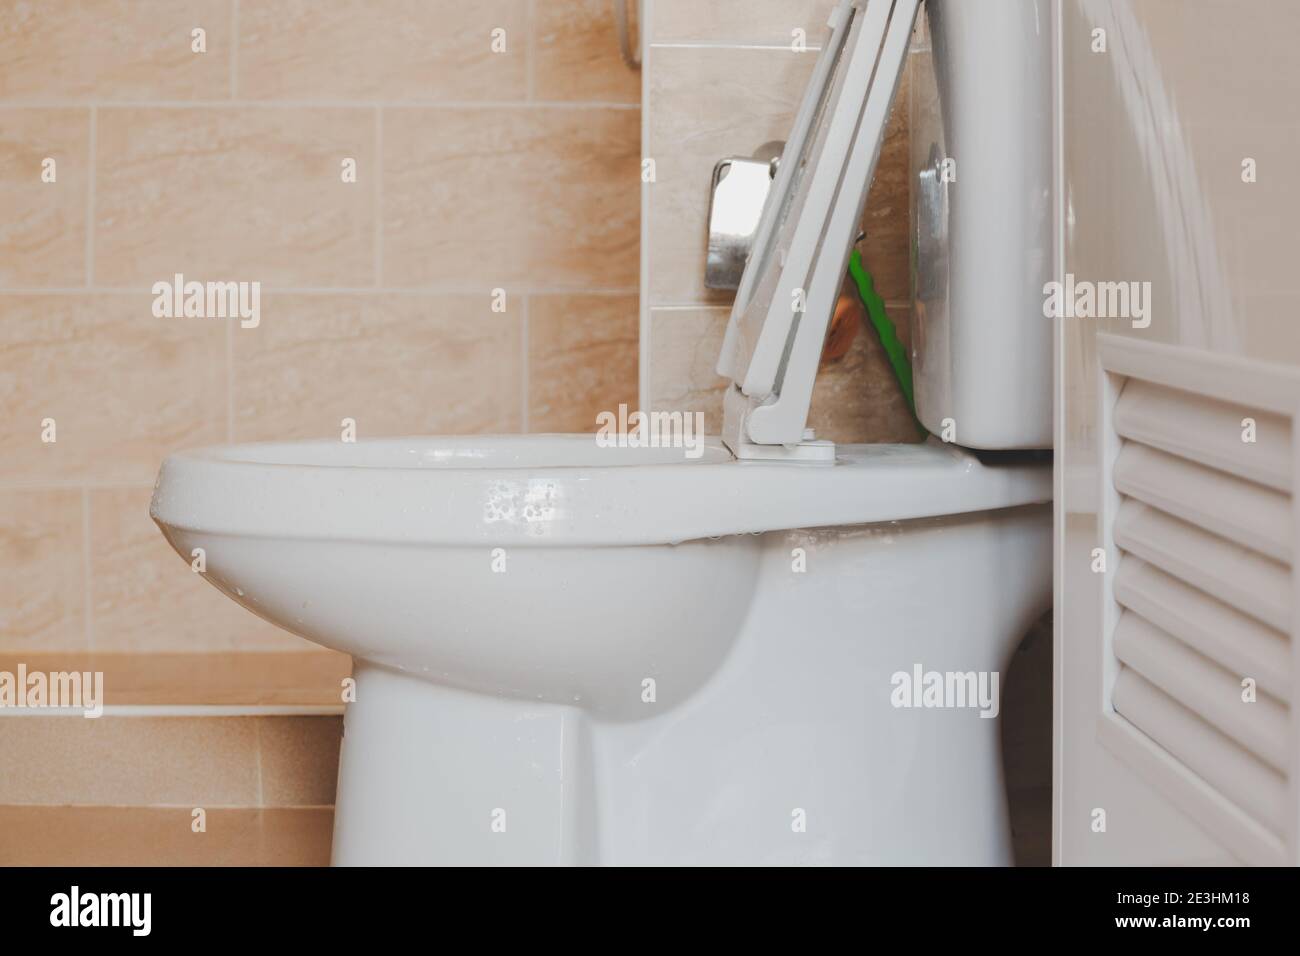 Close up the flush toilet made of ceramic in the bathroom. Stock Photo